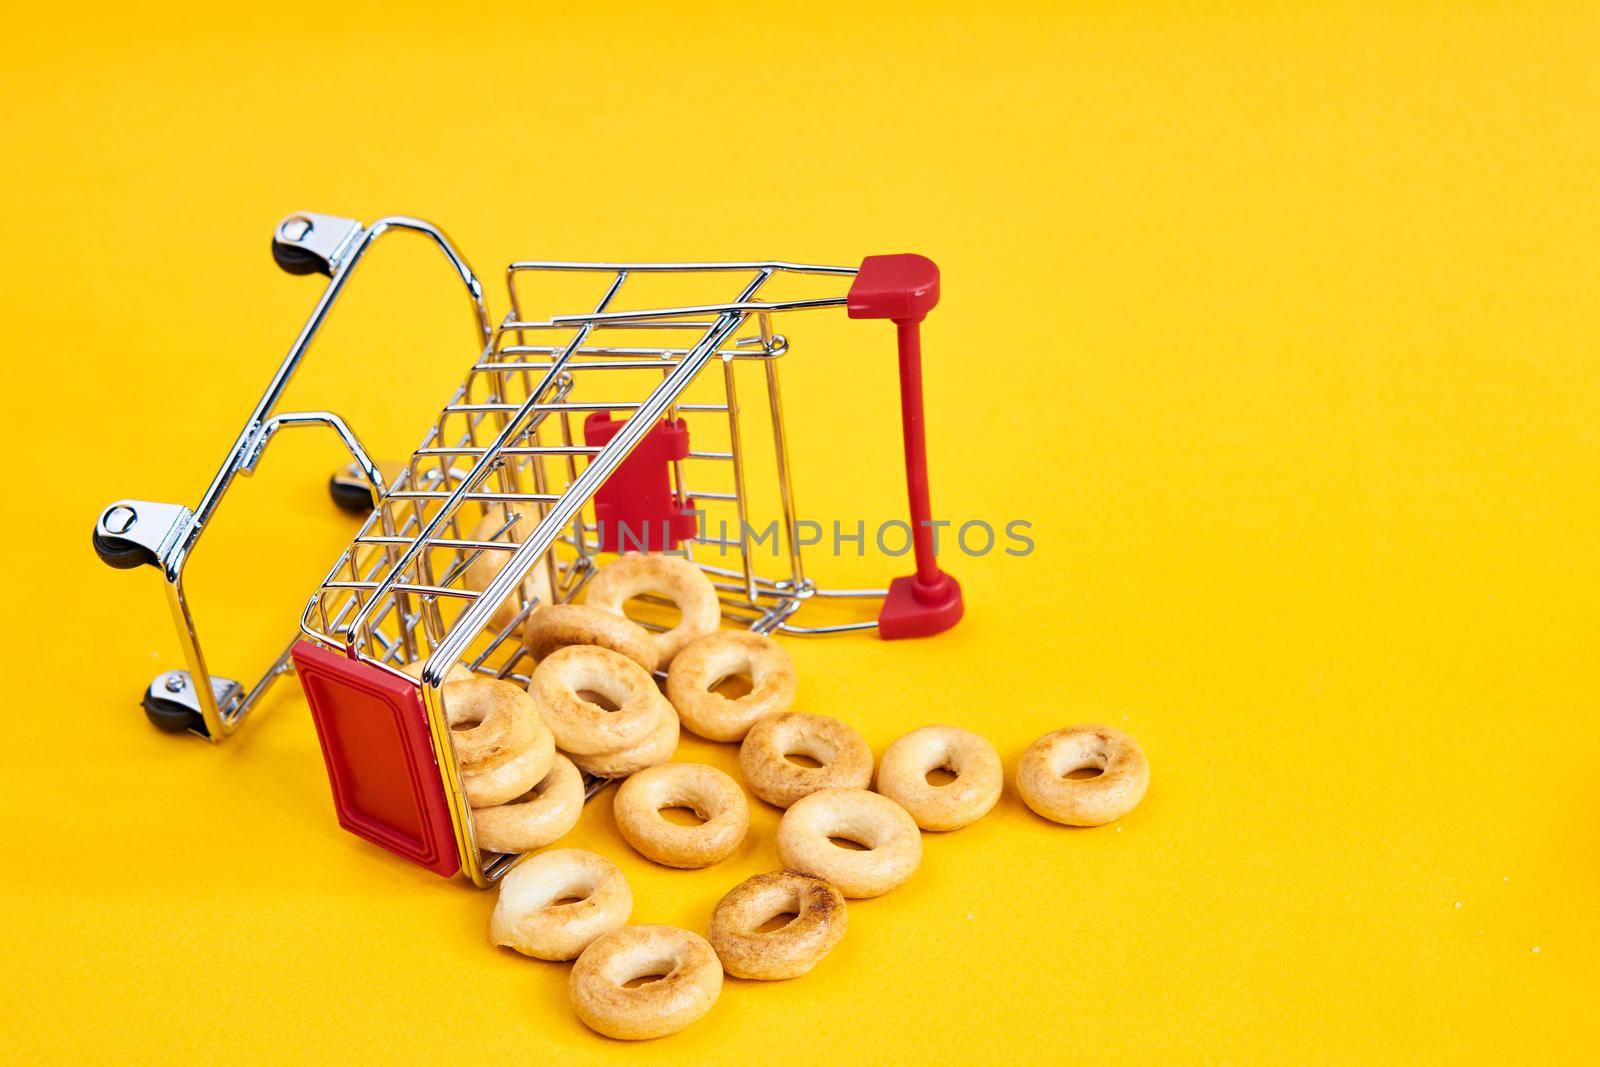 carts with groceries shopping supermarket store yellow background by Vichizh